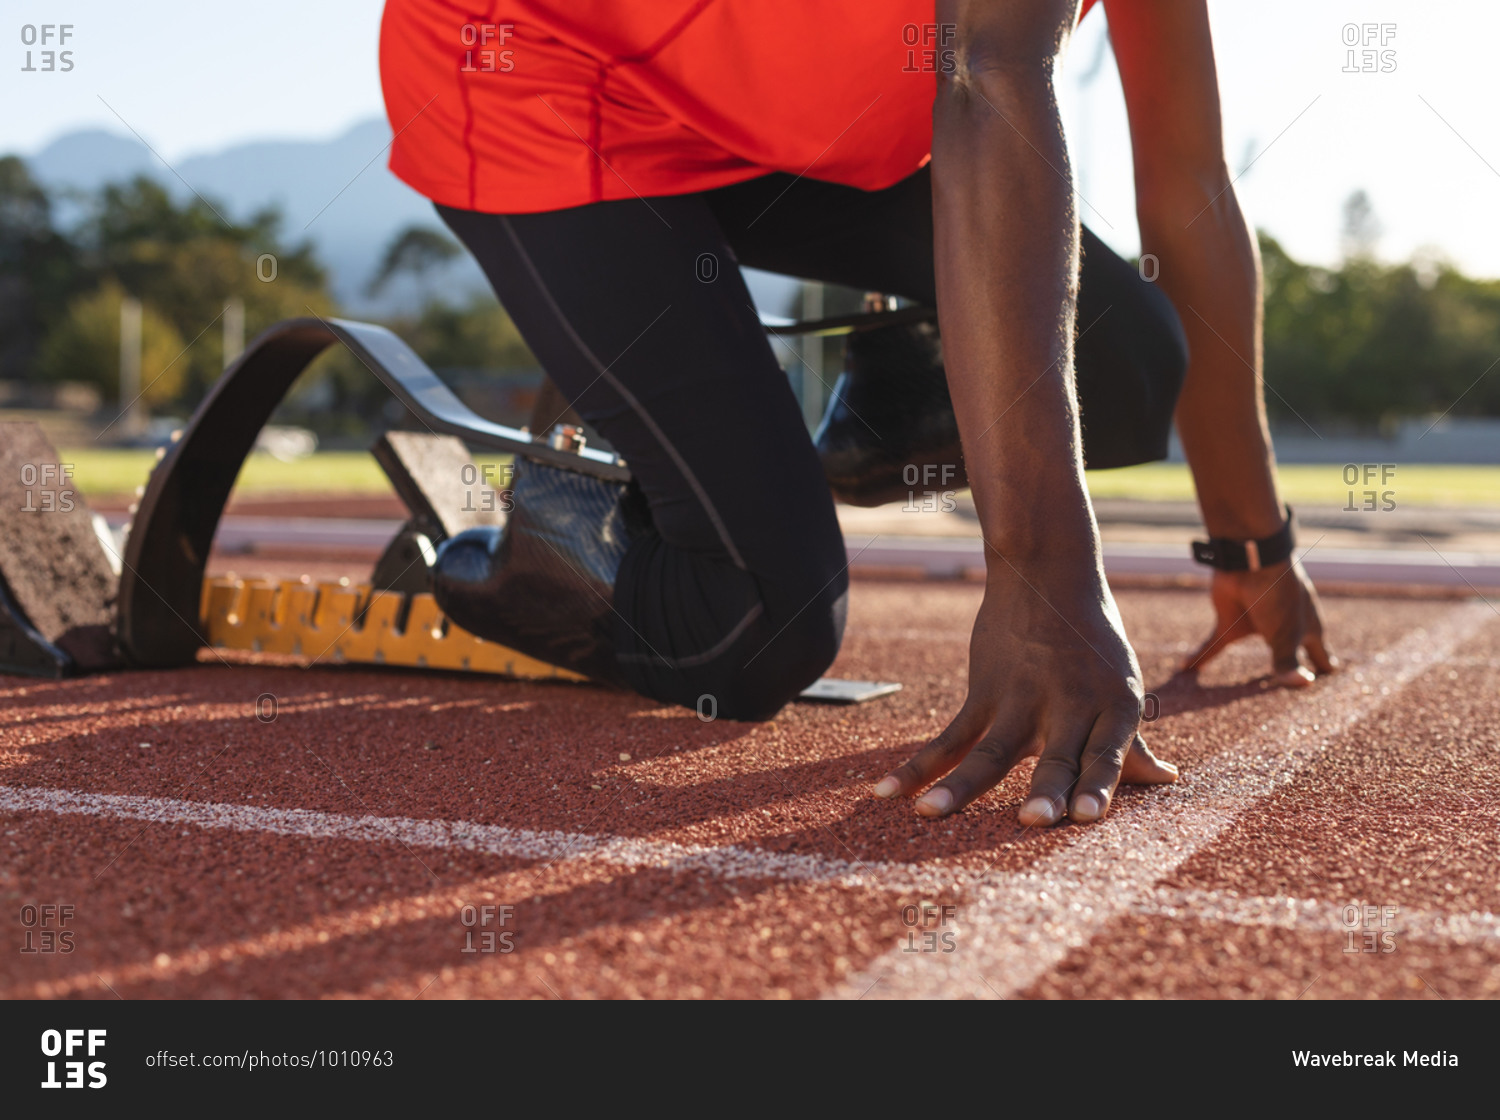 Low section of fit, mixed race disabled male athlete at an outdoor sports stadium, kneeling in starting blocks on race track wearing running blades. Disability athletics sport training.